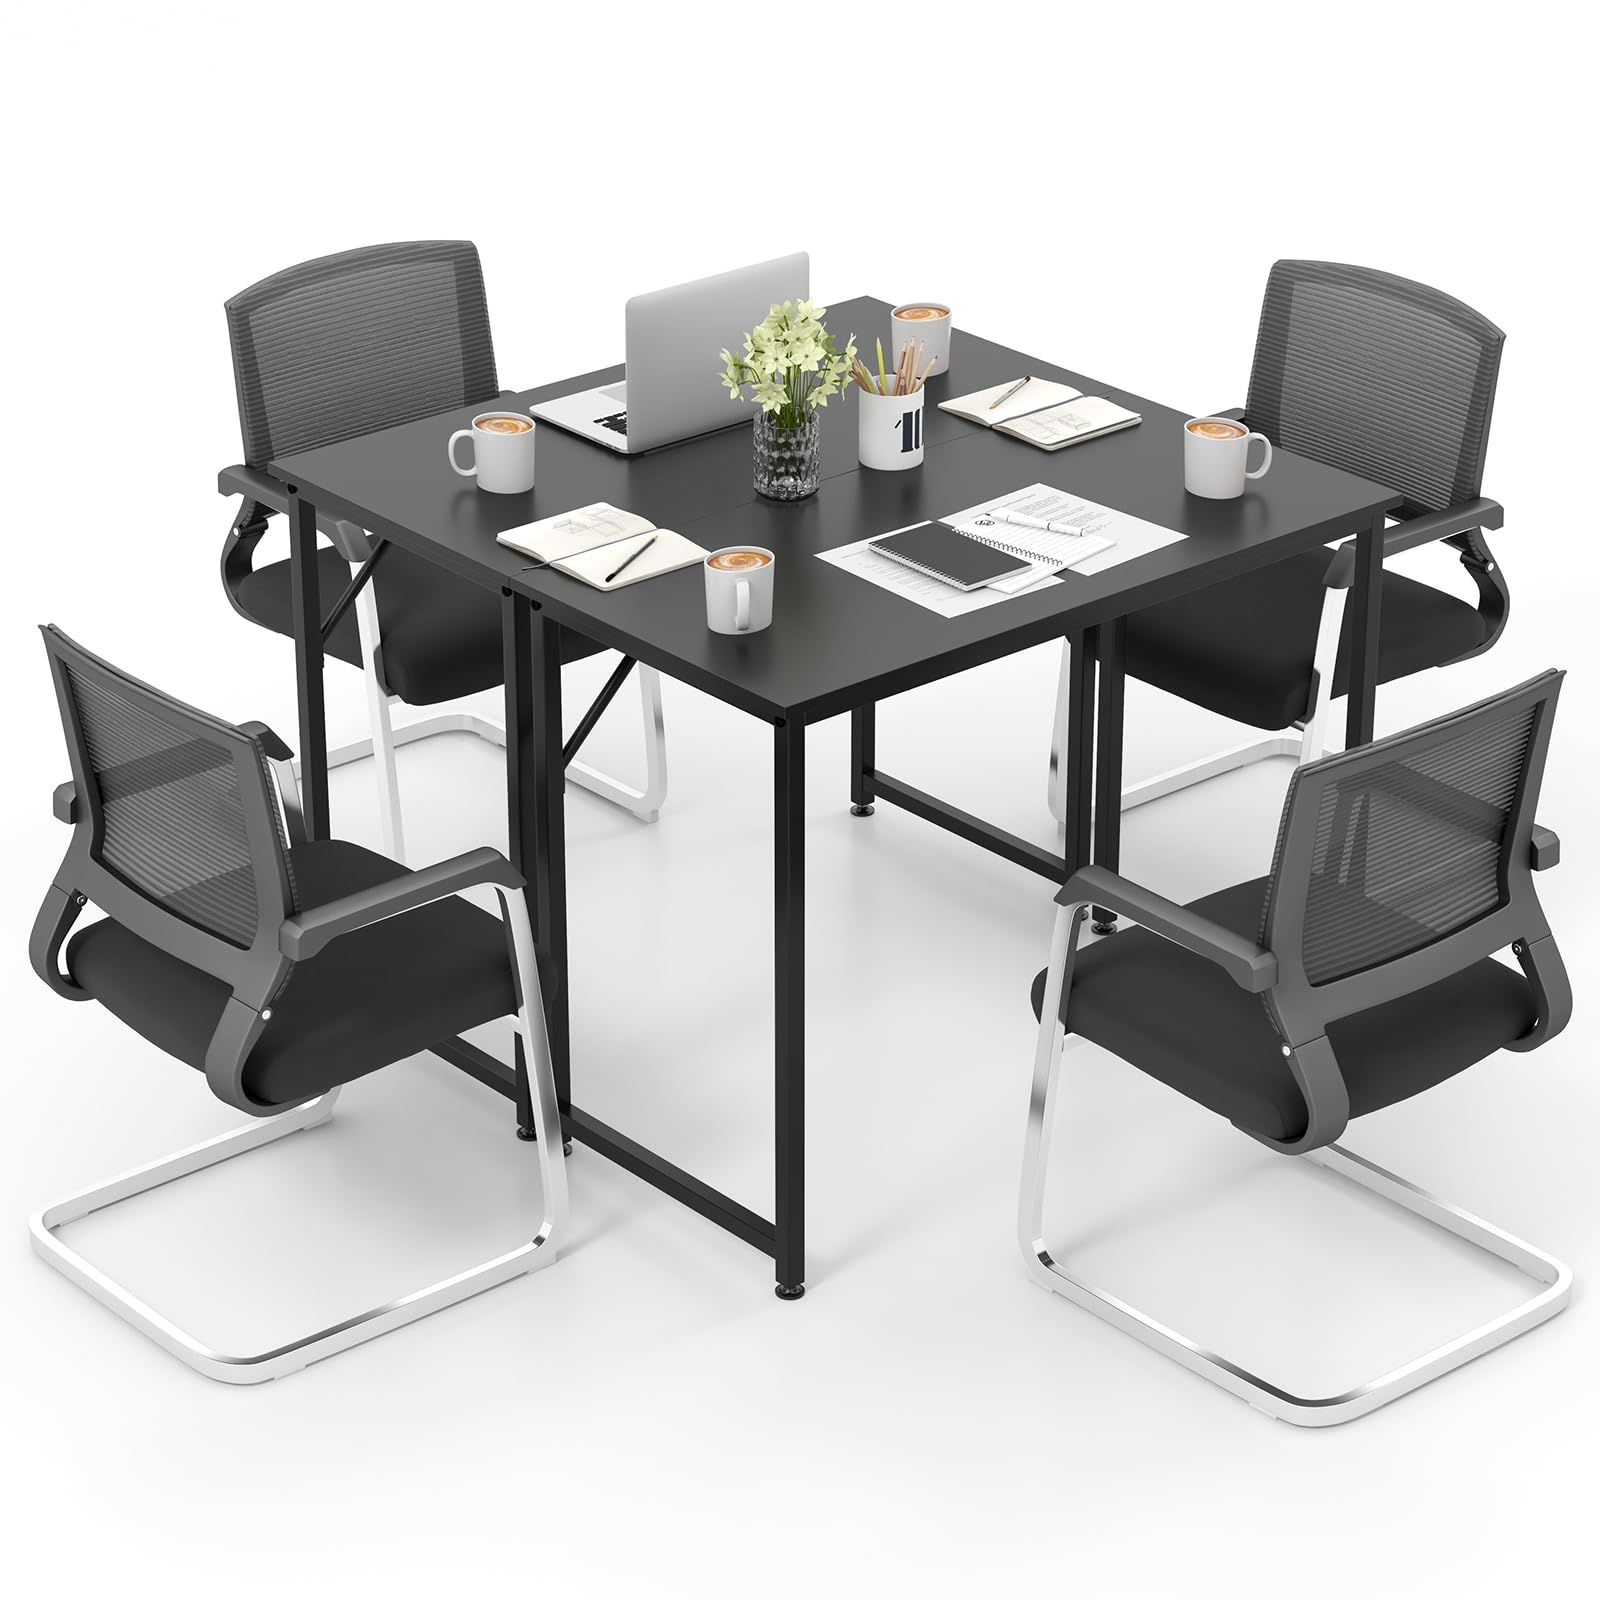 Giantex 6.5 FT Small Conference Table, 2 PCS 40" x 19.5" Rectangular Meeting Table with Heavy-Duty Metal Frame